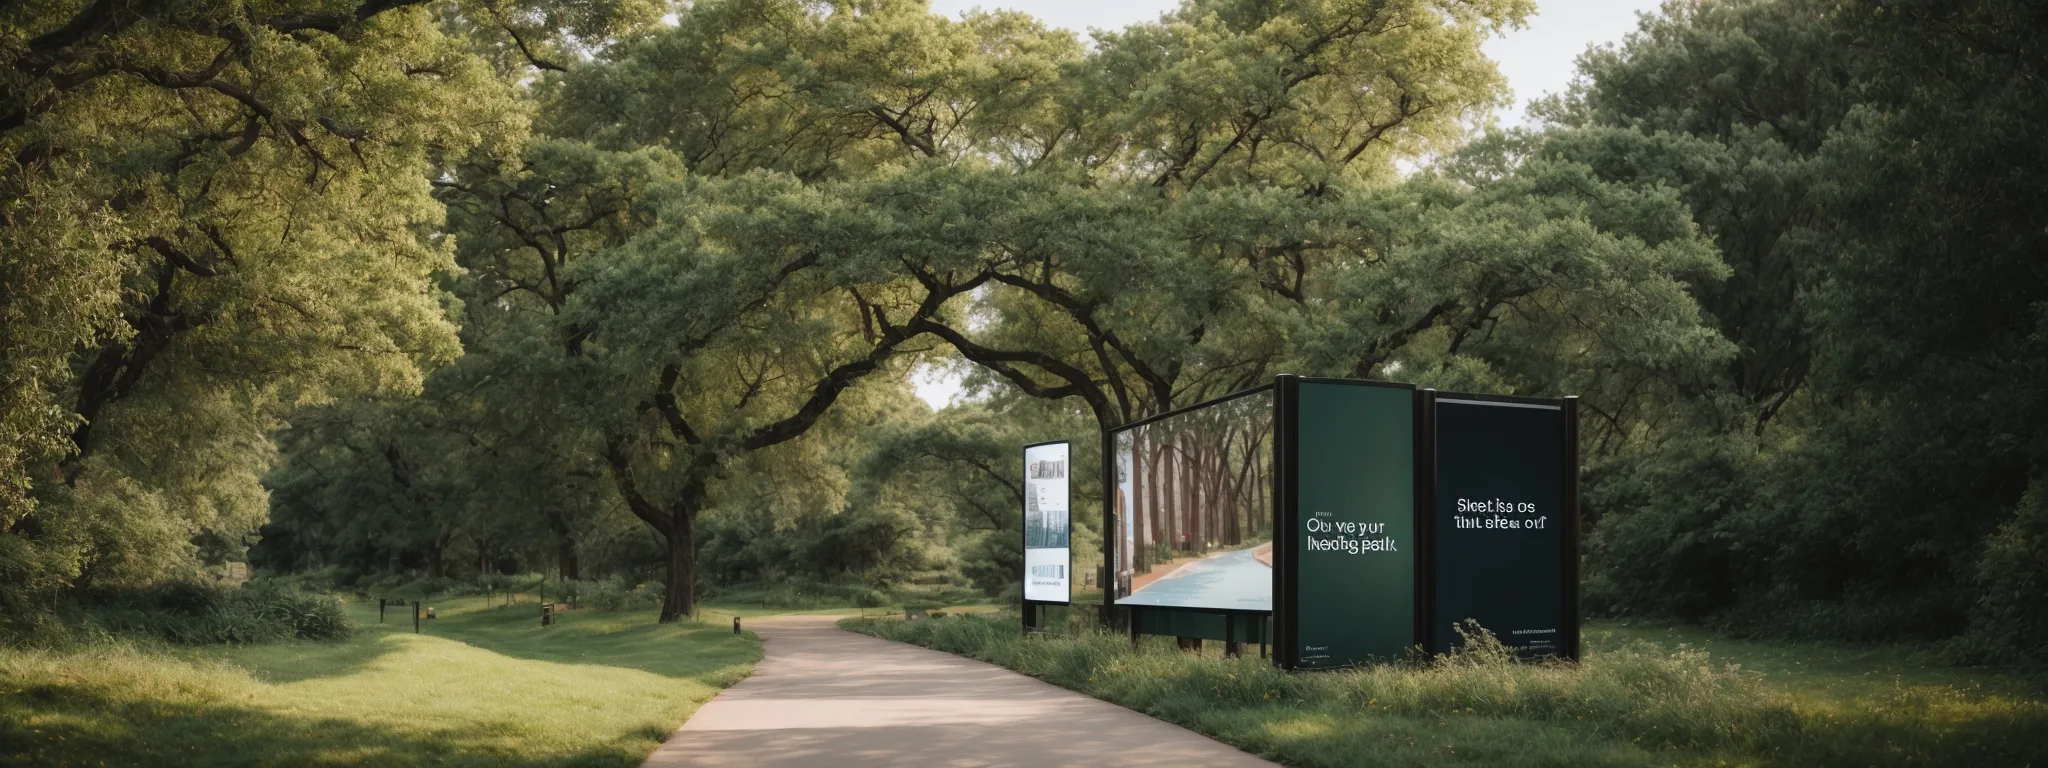 a split-screen of a serene park pathway representing organic content on one side and a bustling digital billboard displaying a prominent ad on the other, captures the contrast between seo and sponsored ads in user experience.